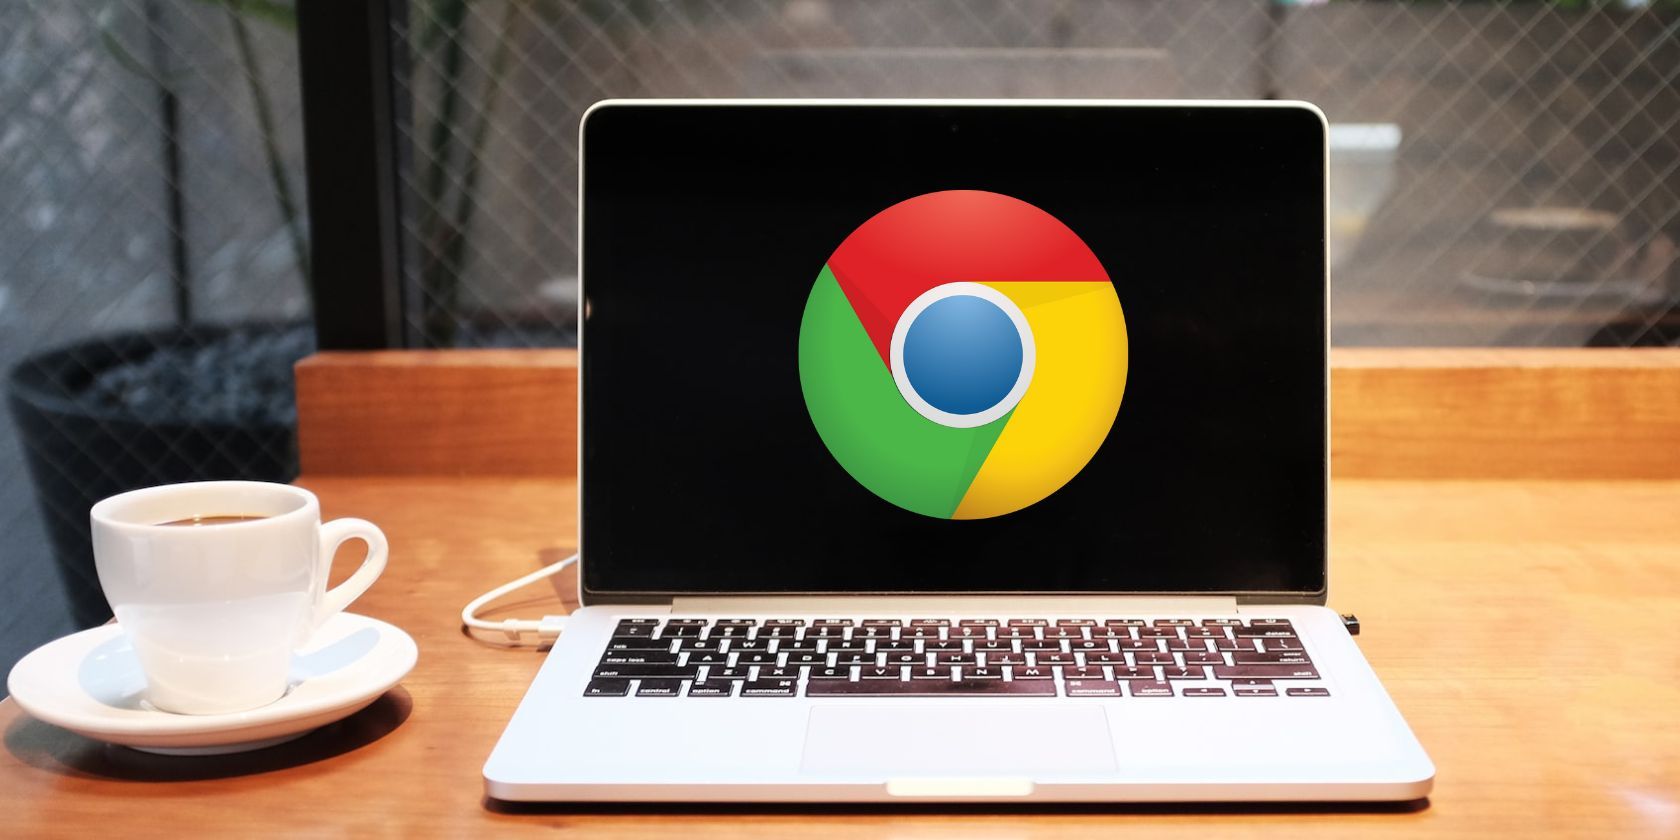 A silver laptop with a Google Chrome logo on screen